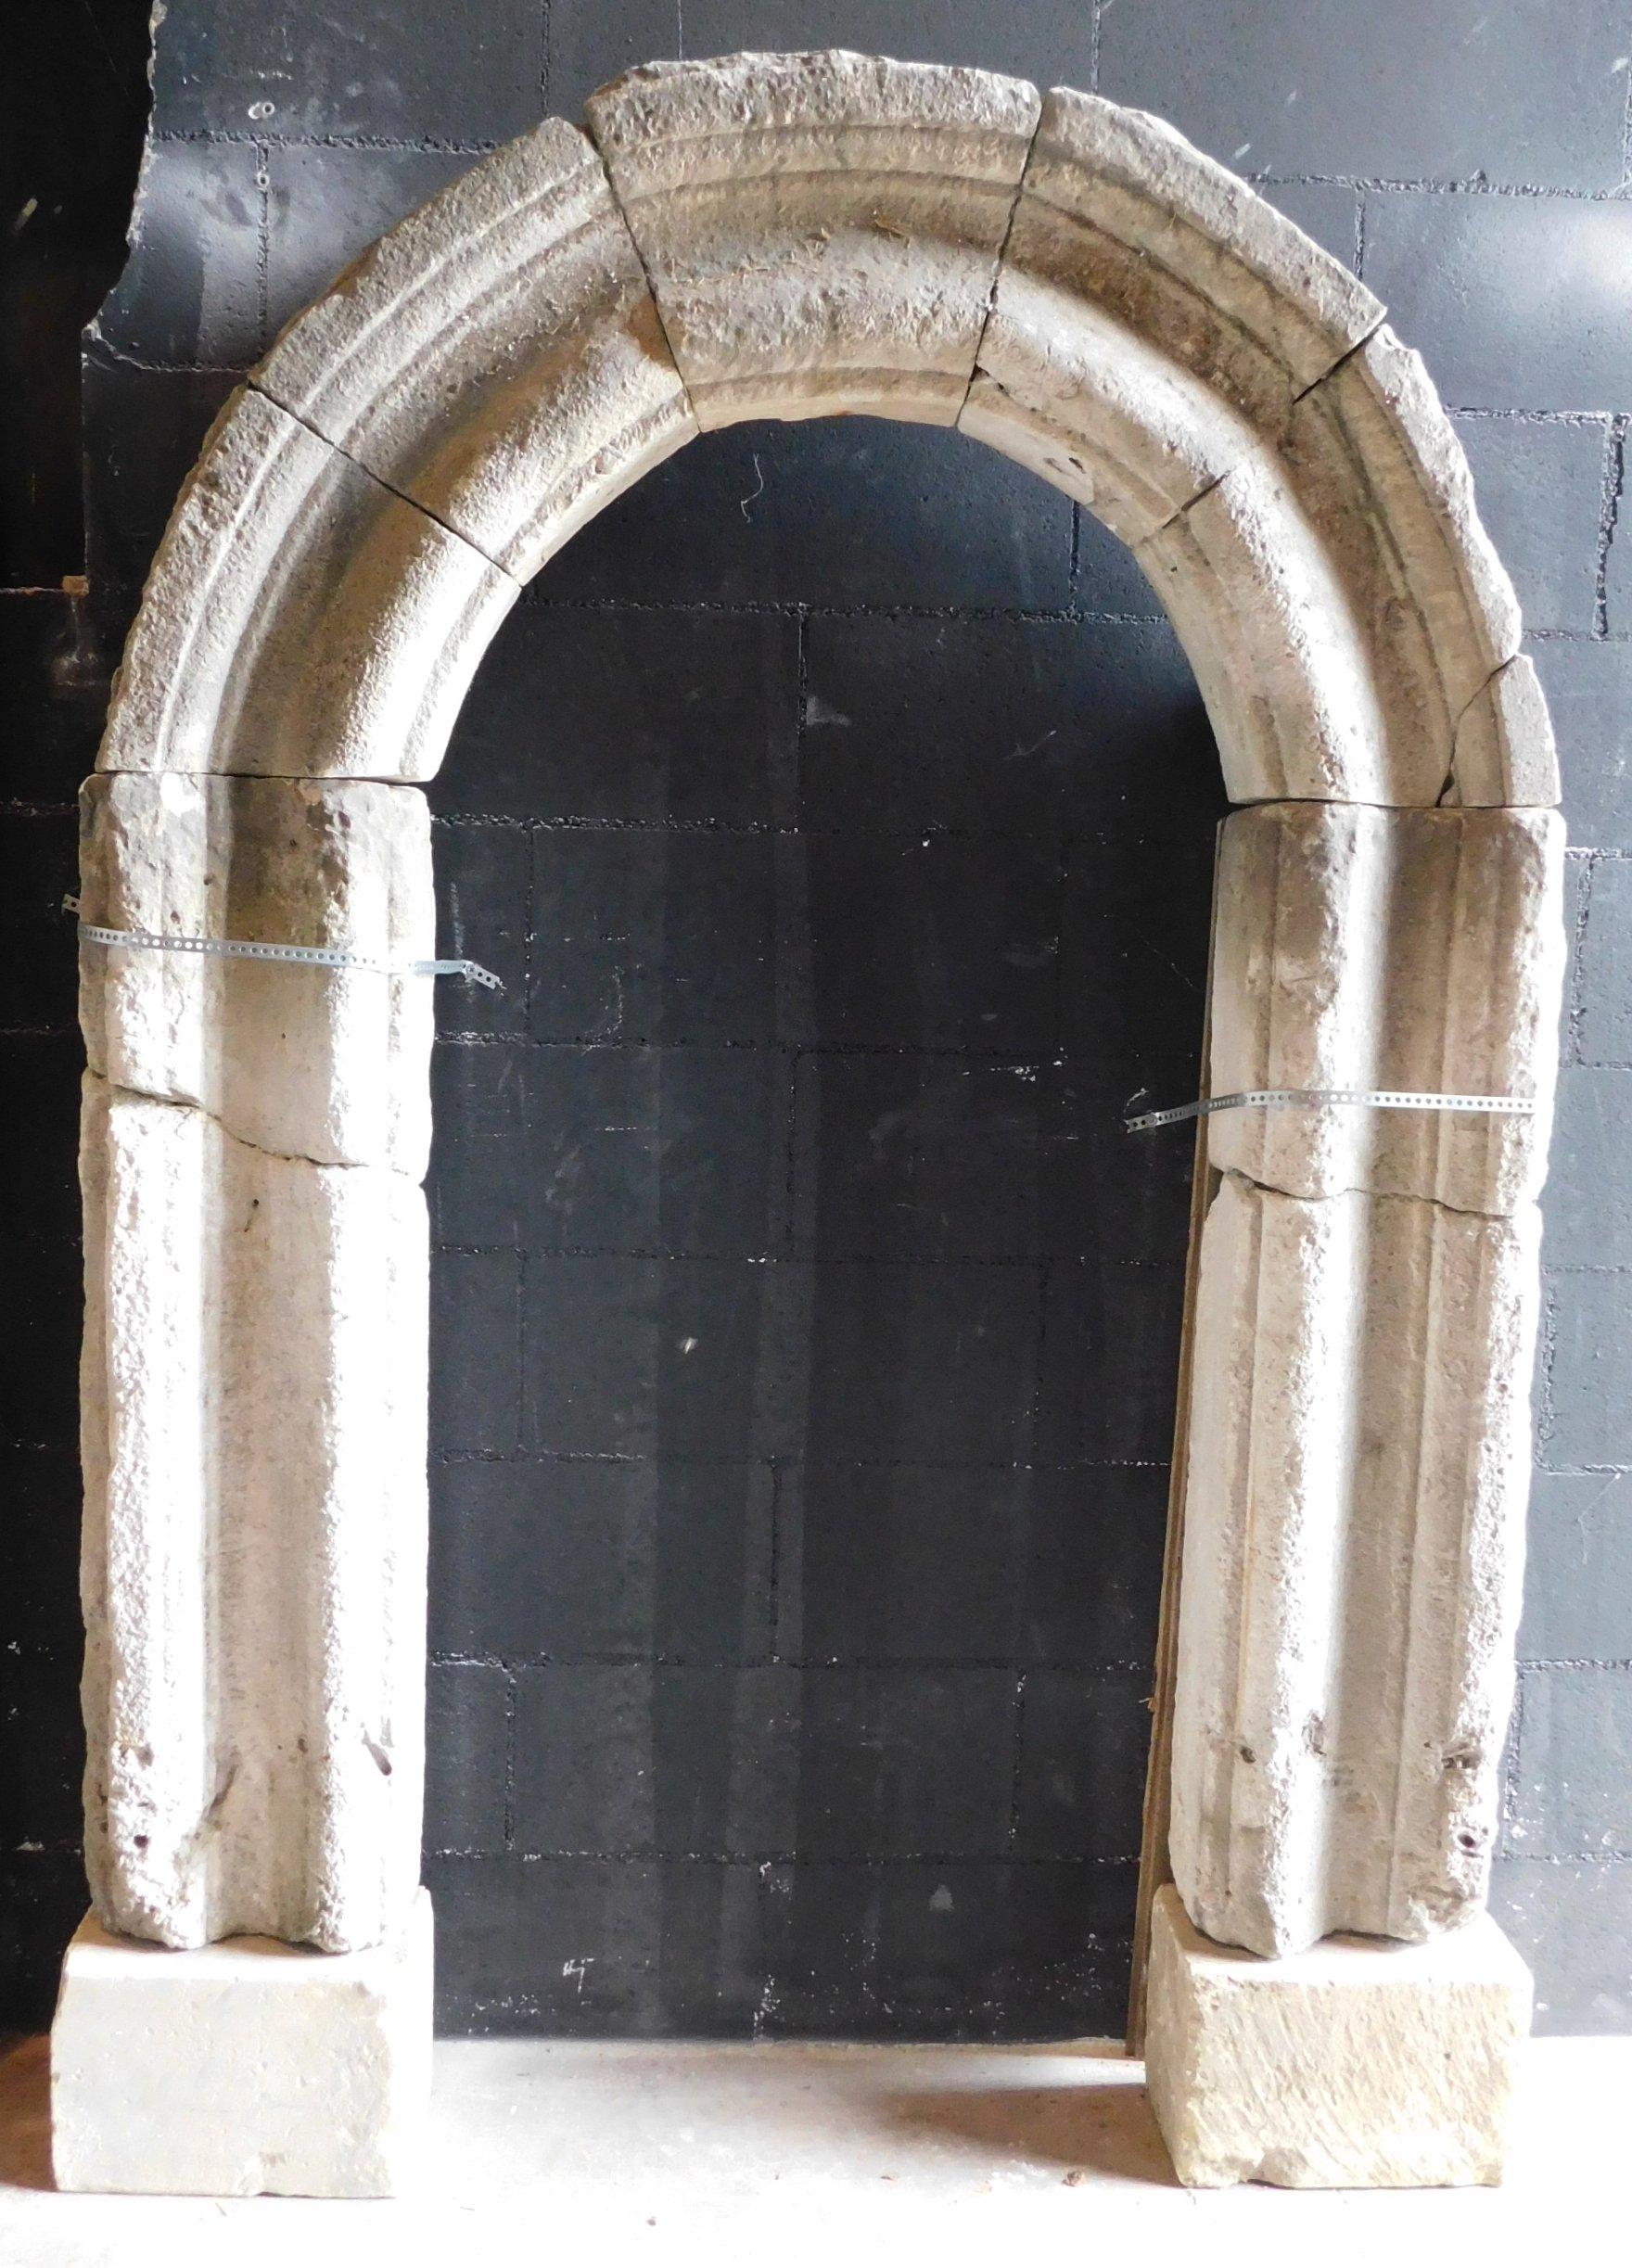 Italian Antique Arched Portal / Window Frame in Grey Stone, 17th Century, Italy For Sale